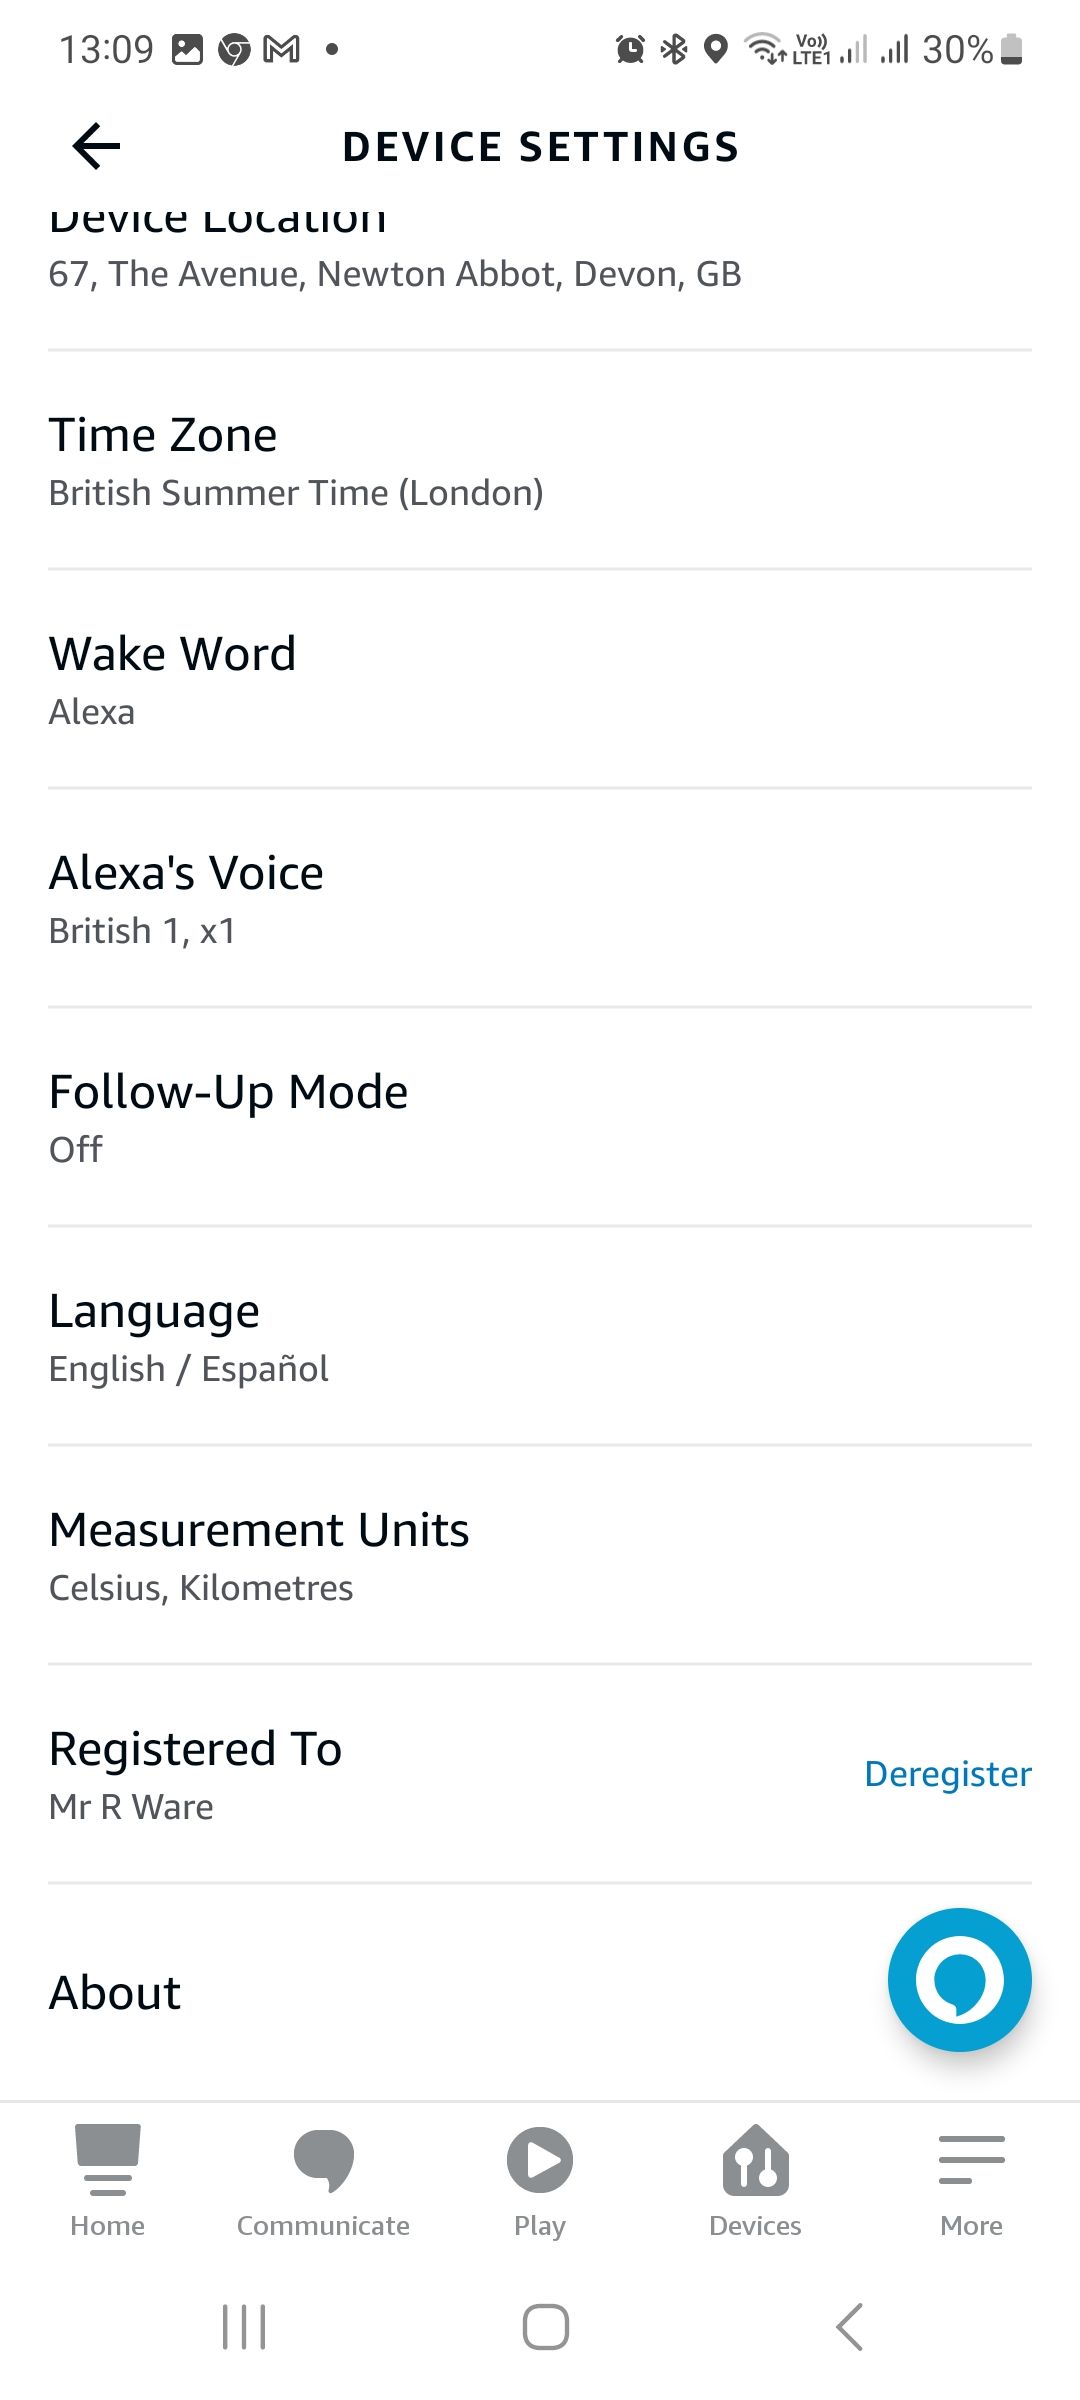 device settings for an echo device